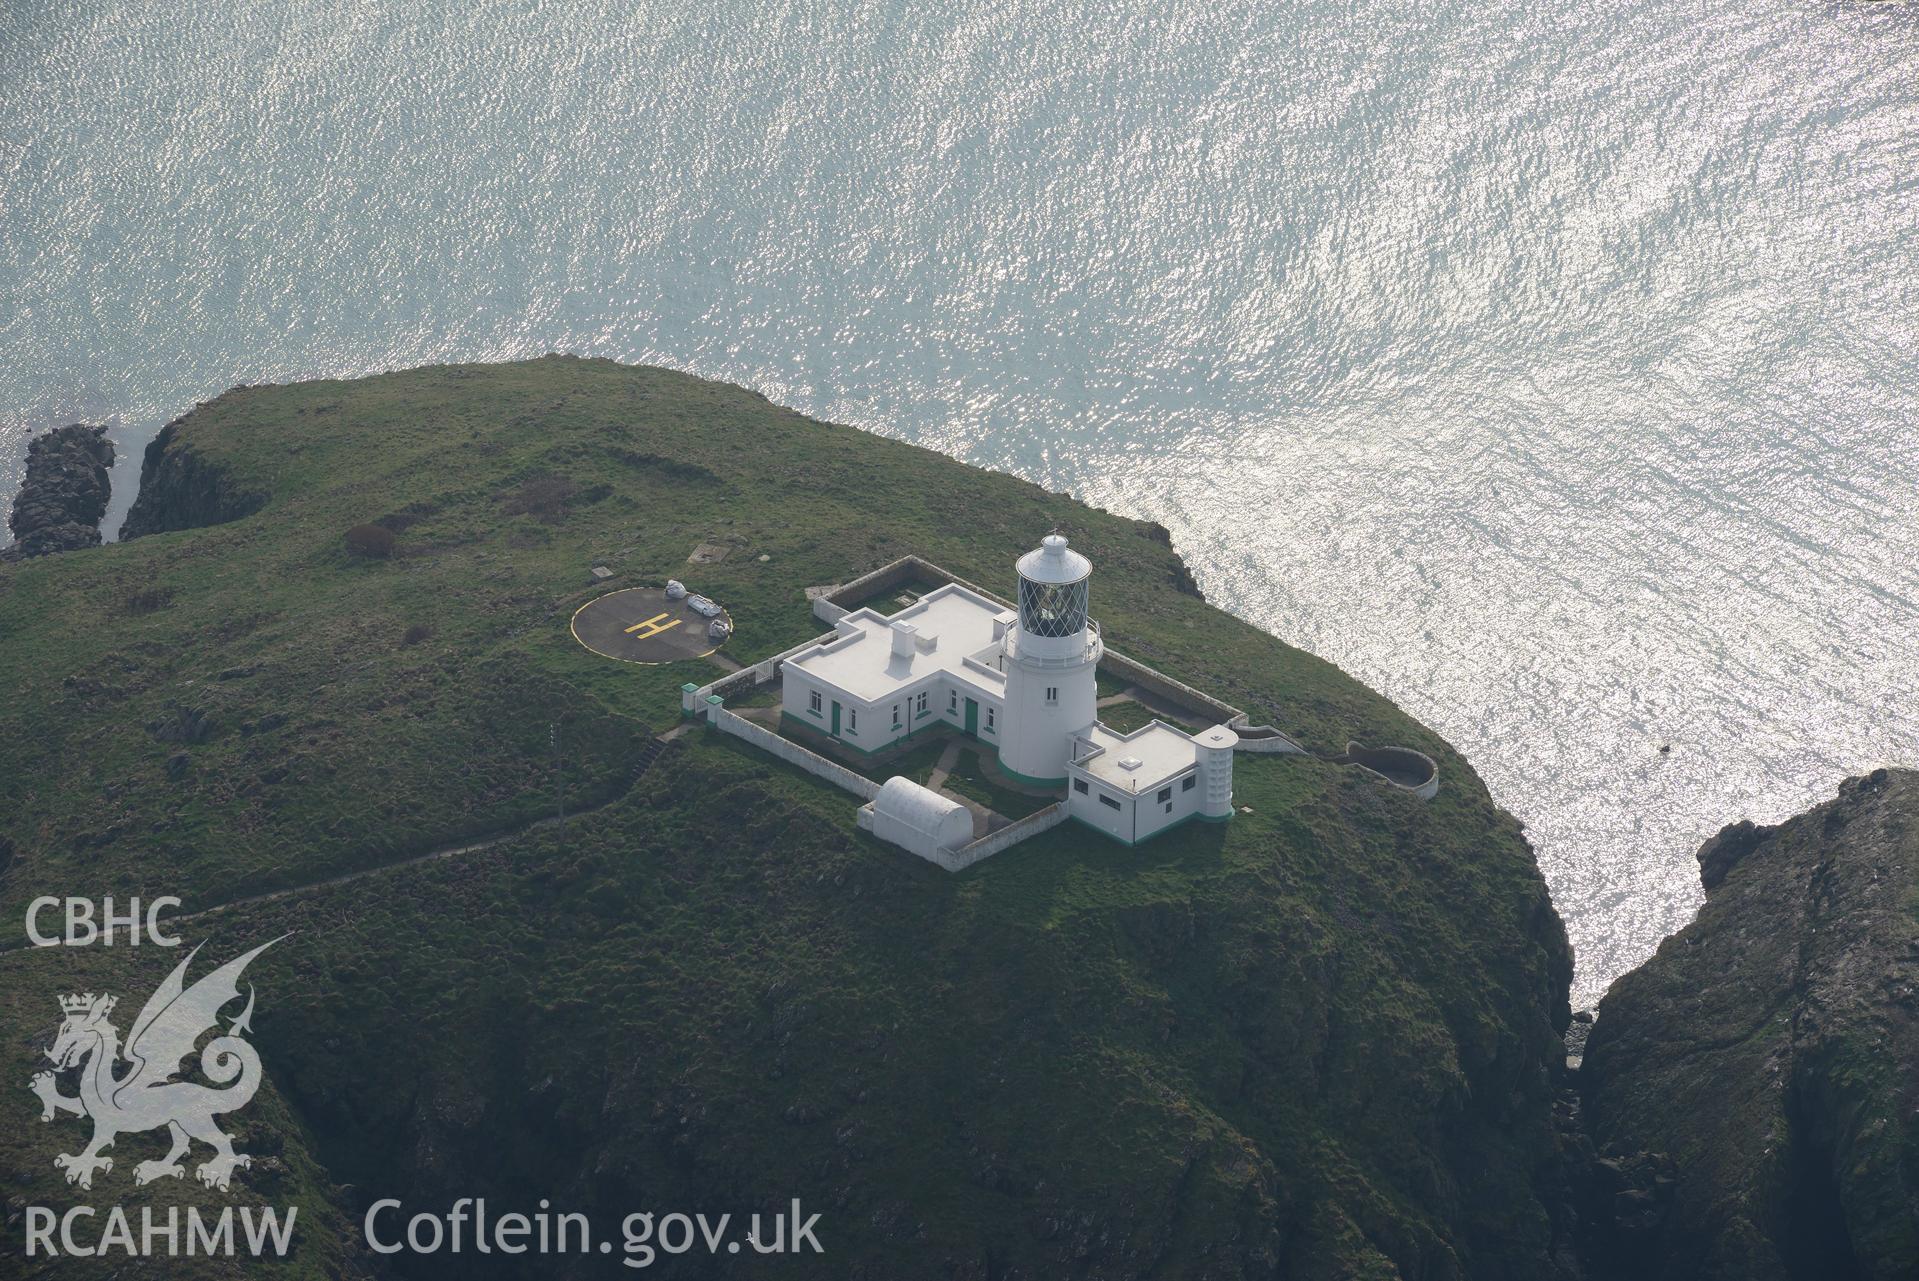 Aerial photography of Strumble Head lighthouse taken on 27th March 2017. Baseline aerial reconnaissance survey for the CHERISH Project. ? Crown: CHERISH PROJECT 2017. Produced with EU funds through the Ireland Wales Co-operation Programme 2014-2020. All material made freely available through the Open Government Licence.